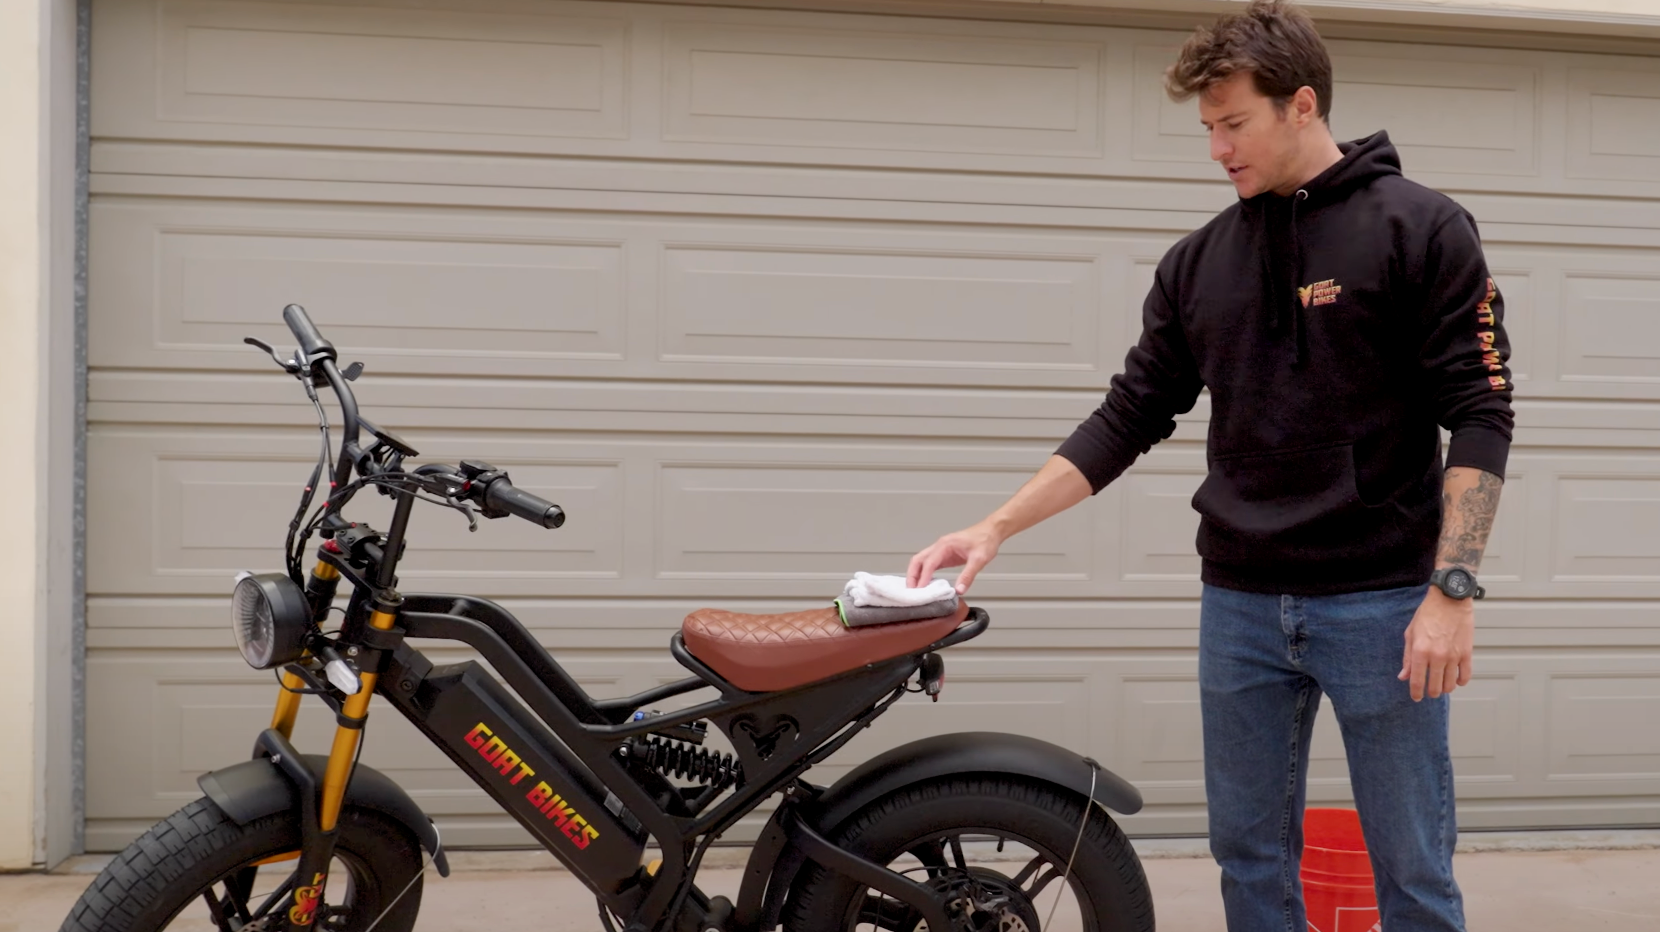 The BEST Way To Clean Your E-Bike